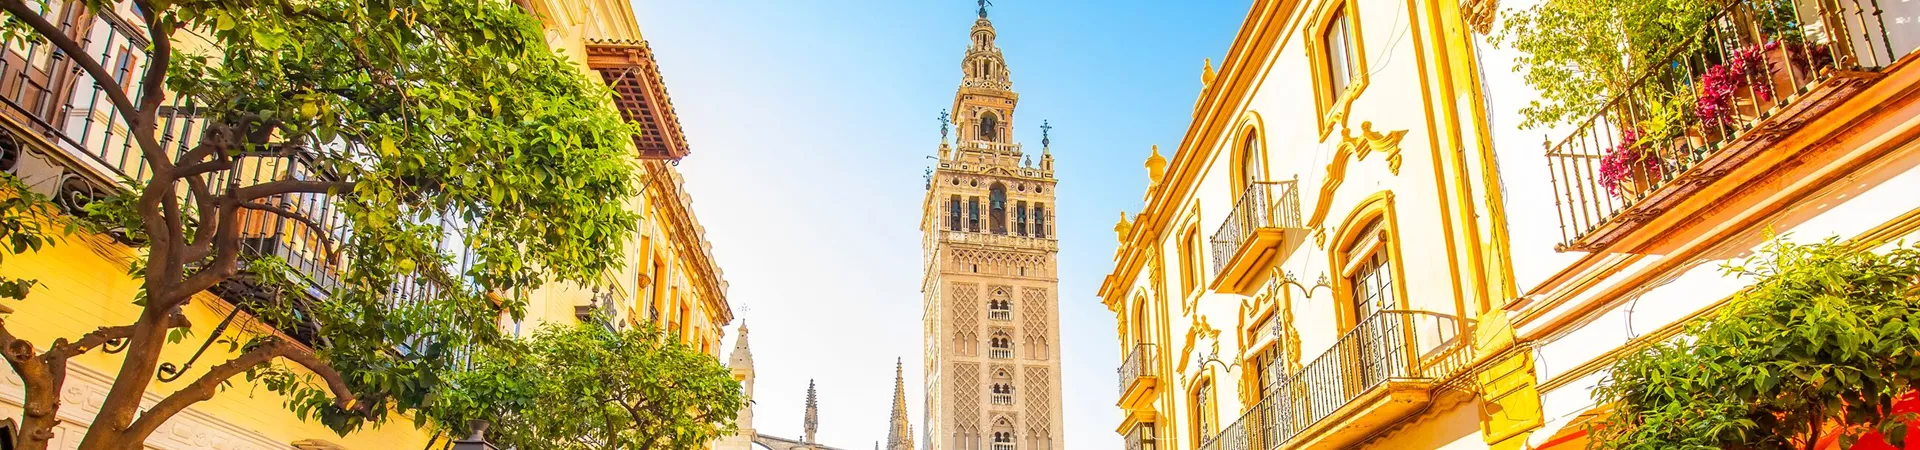 Seville Cathedral And Giralda Tower, Spain